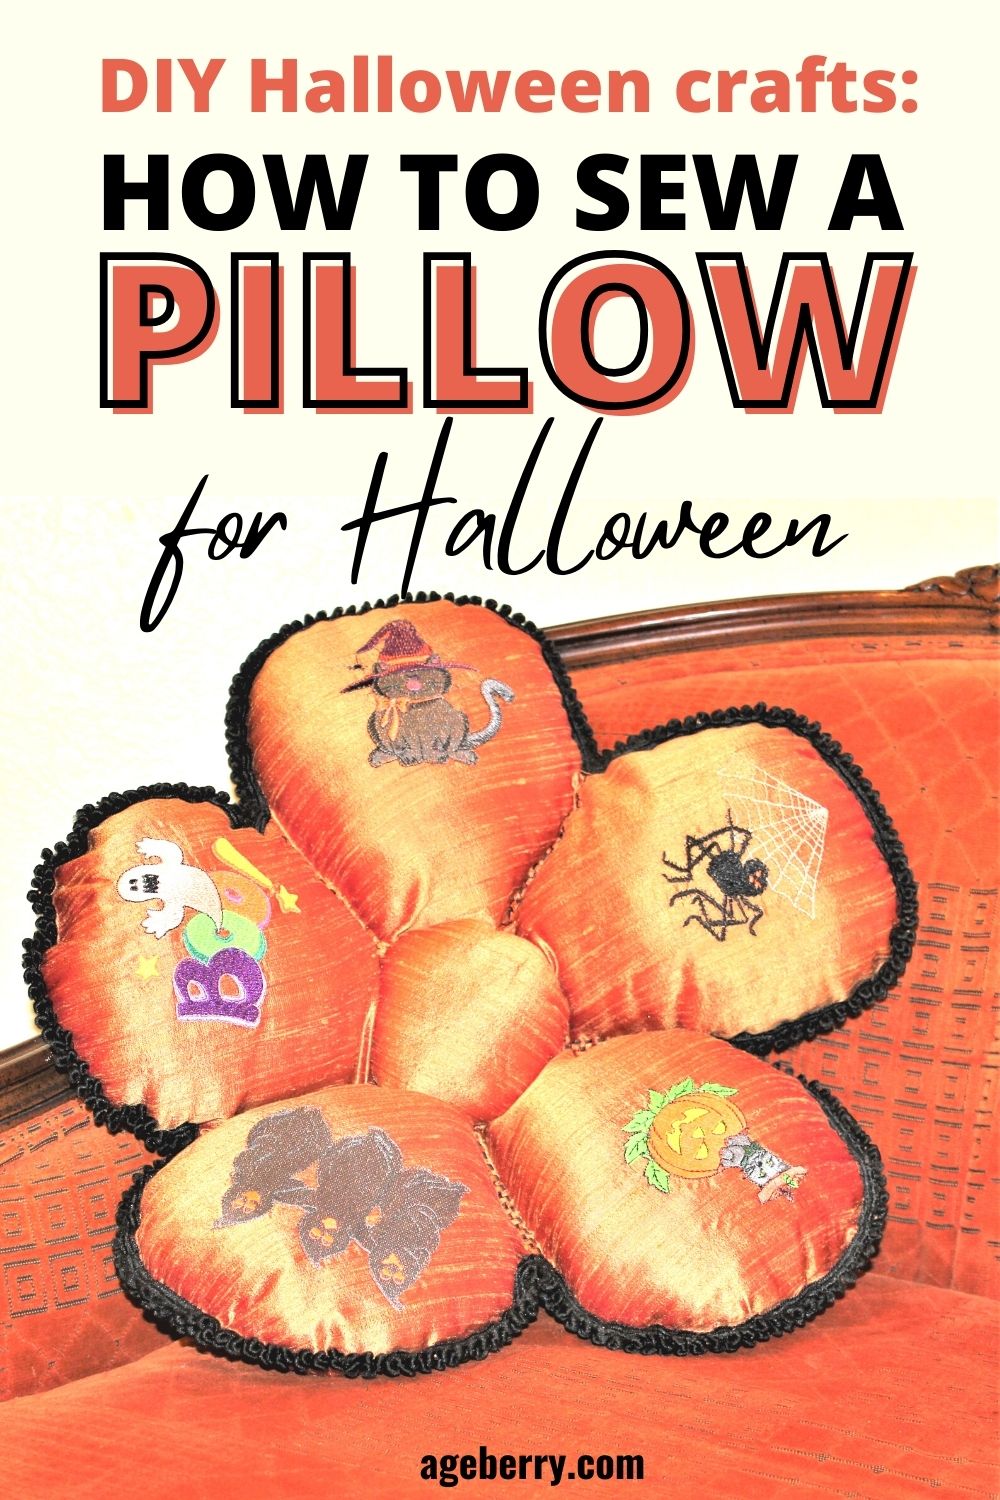 DIY Halloween crafts how to sew a pillow for Halloween